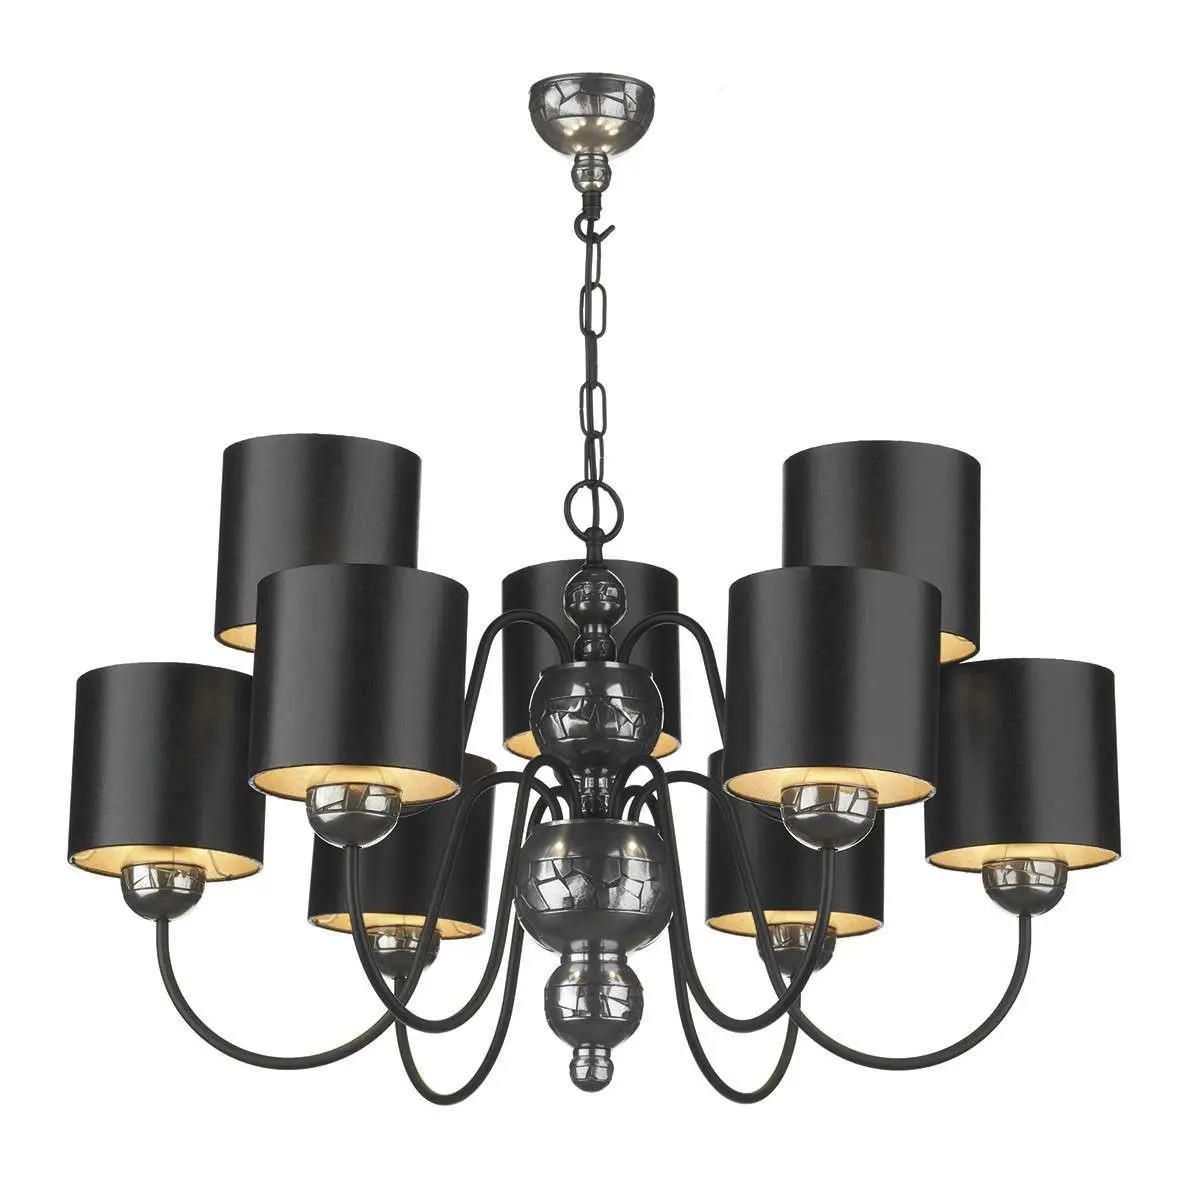 Garbo 9 Light Pendant Pewter complete with Black/Silver Shades